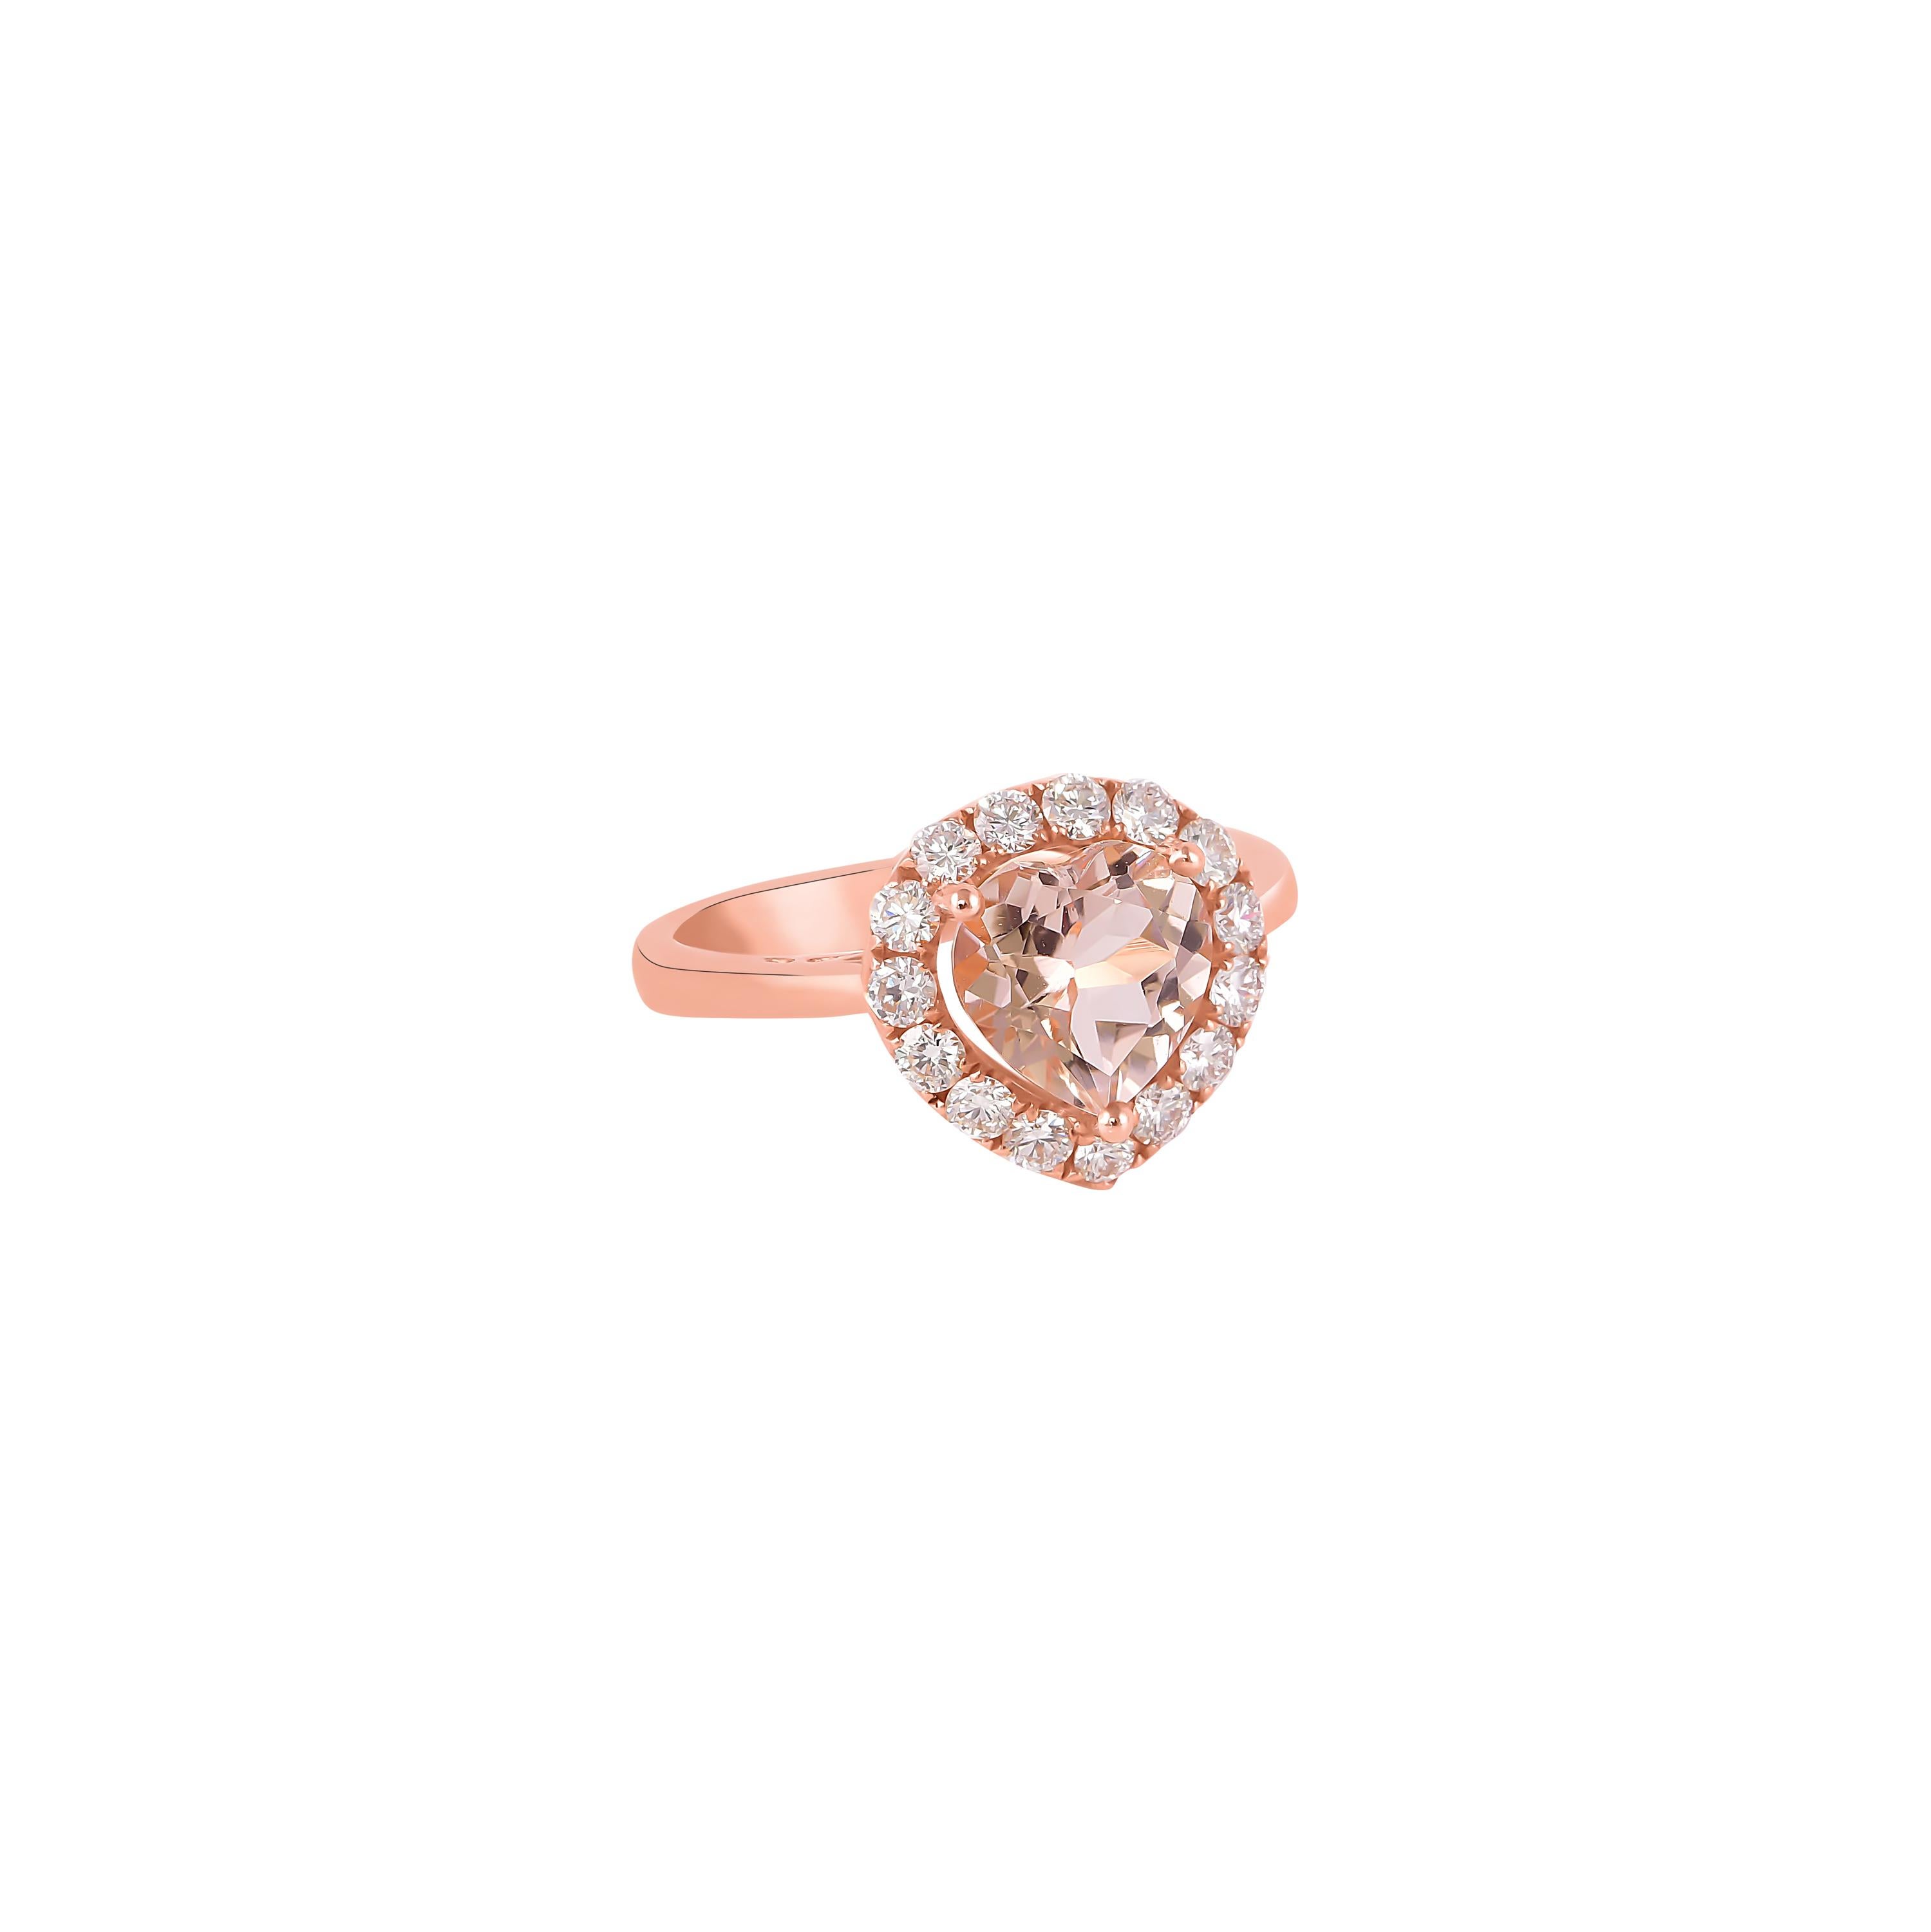 This collection features an array of magnificent morganites! Accented with diamonds these rings are made in rose gold and present a classic yet elegant look. 

Classic morganite ring in 18K rose gold with diamonds. 

Morganite: 1.629 carat heart